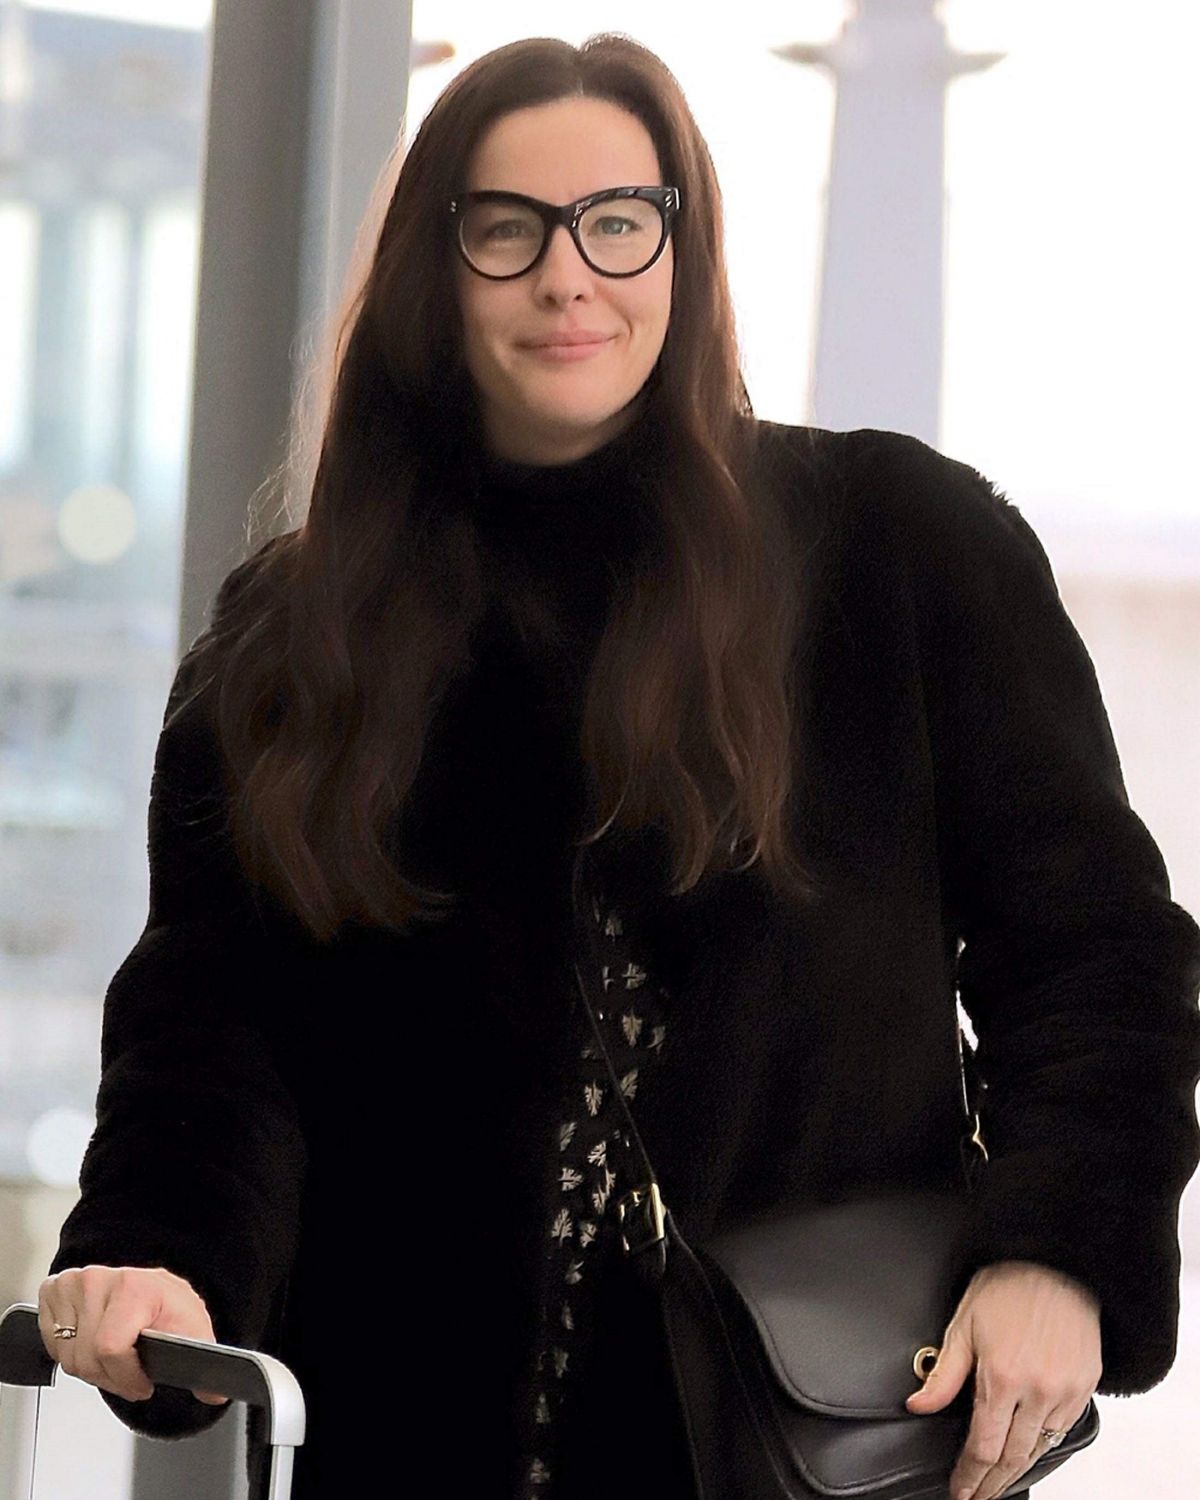 LIV TYLER at Heathrow Airport in London 11/21/2018 HawtCelebs